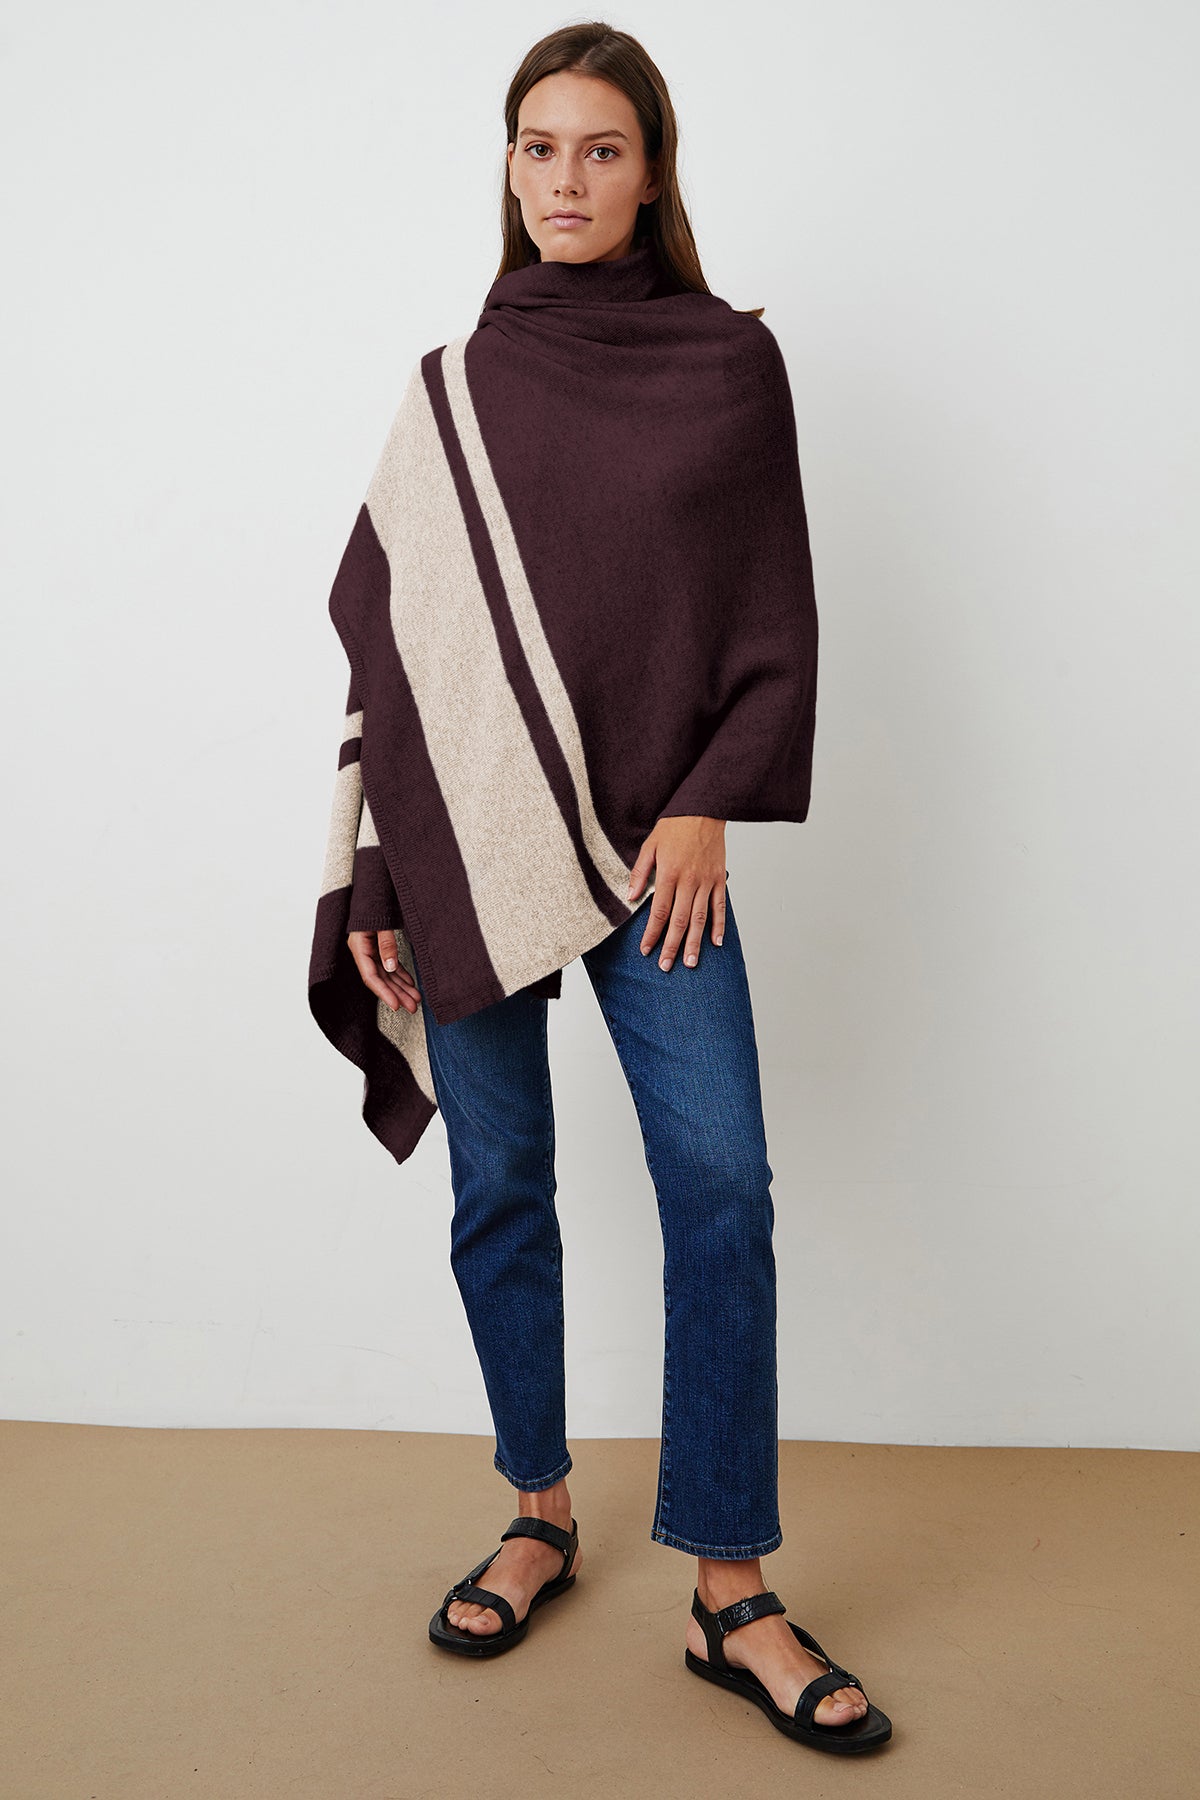   A cozy woman wearing a burgundy and beige striped poncho made of Jenny Graham Home's LIV Cashmere Throw Blanket. 